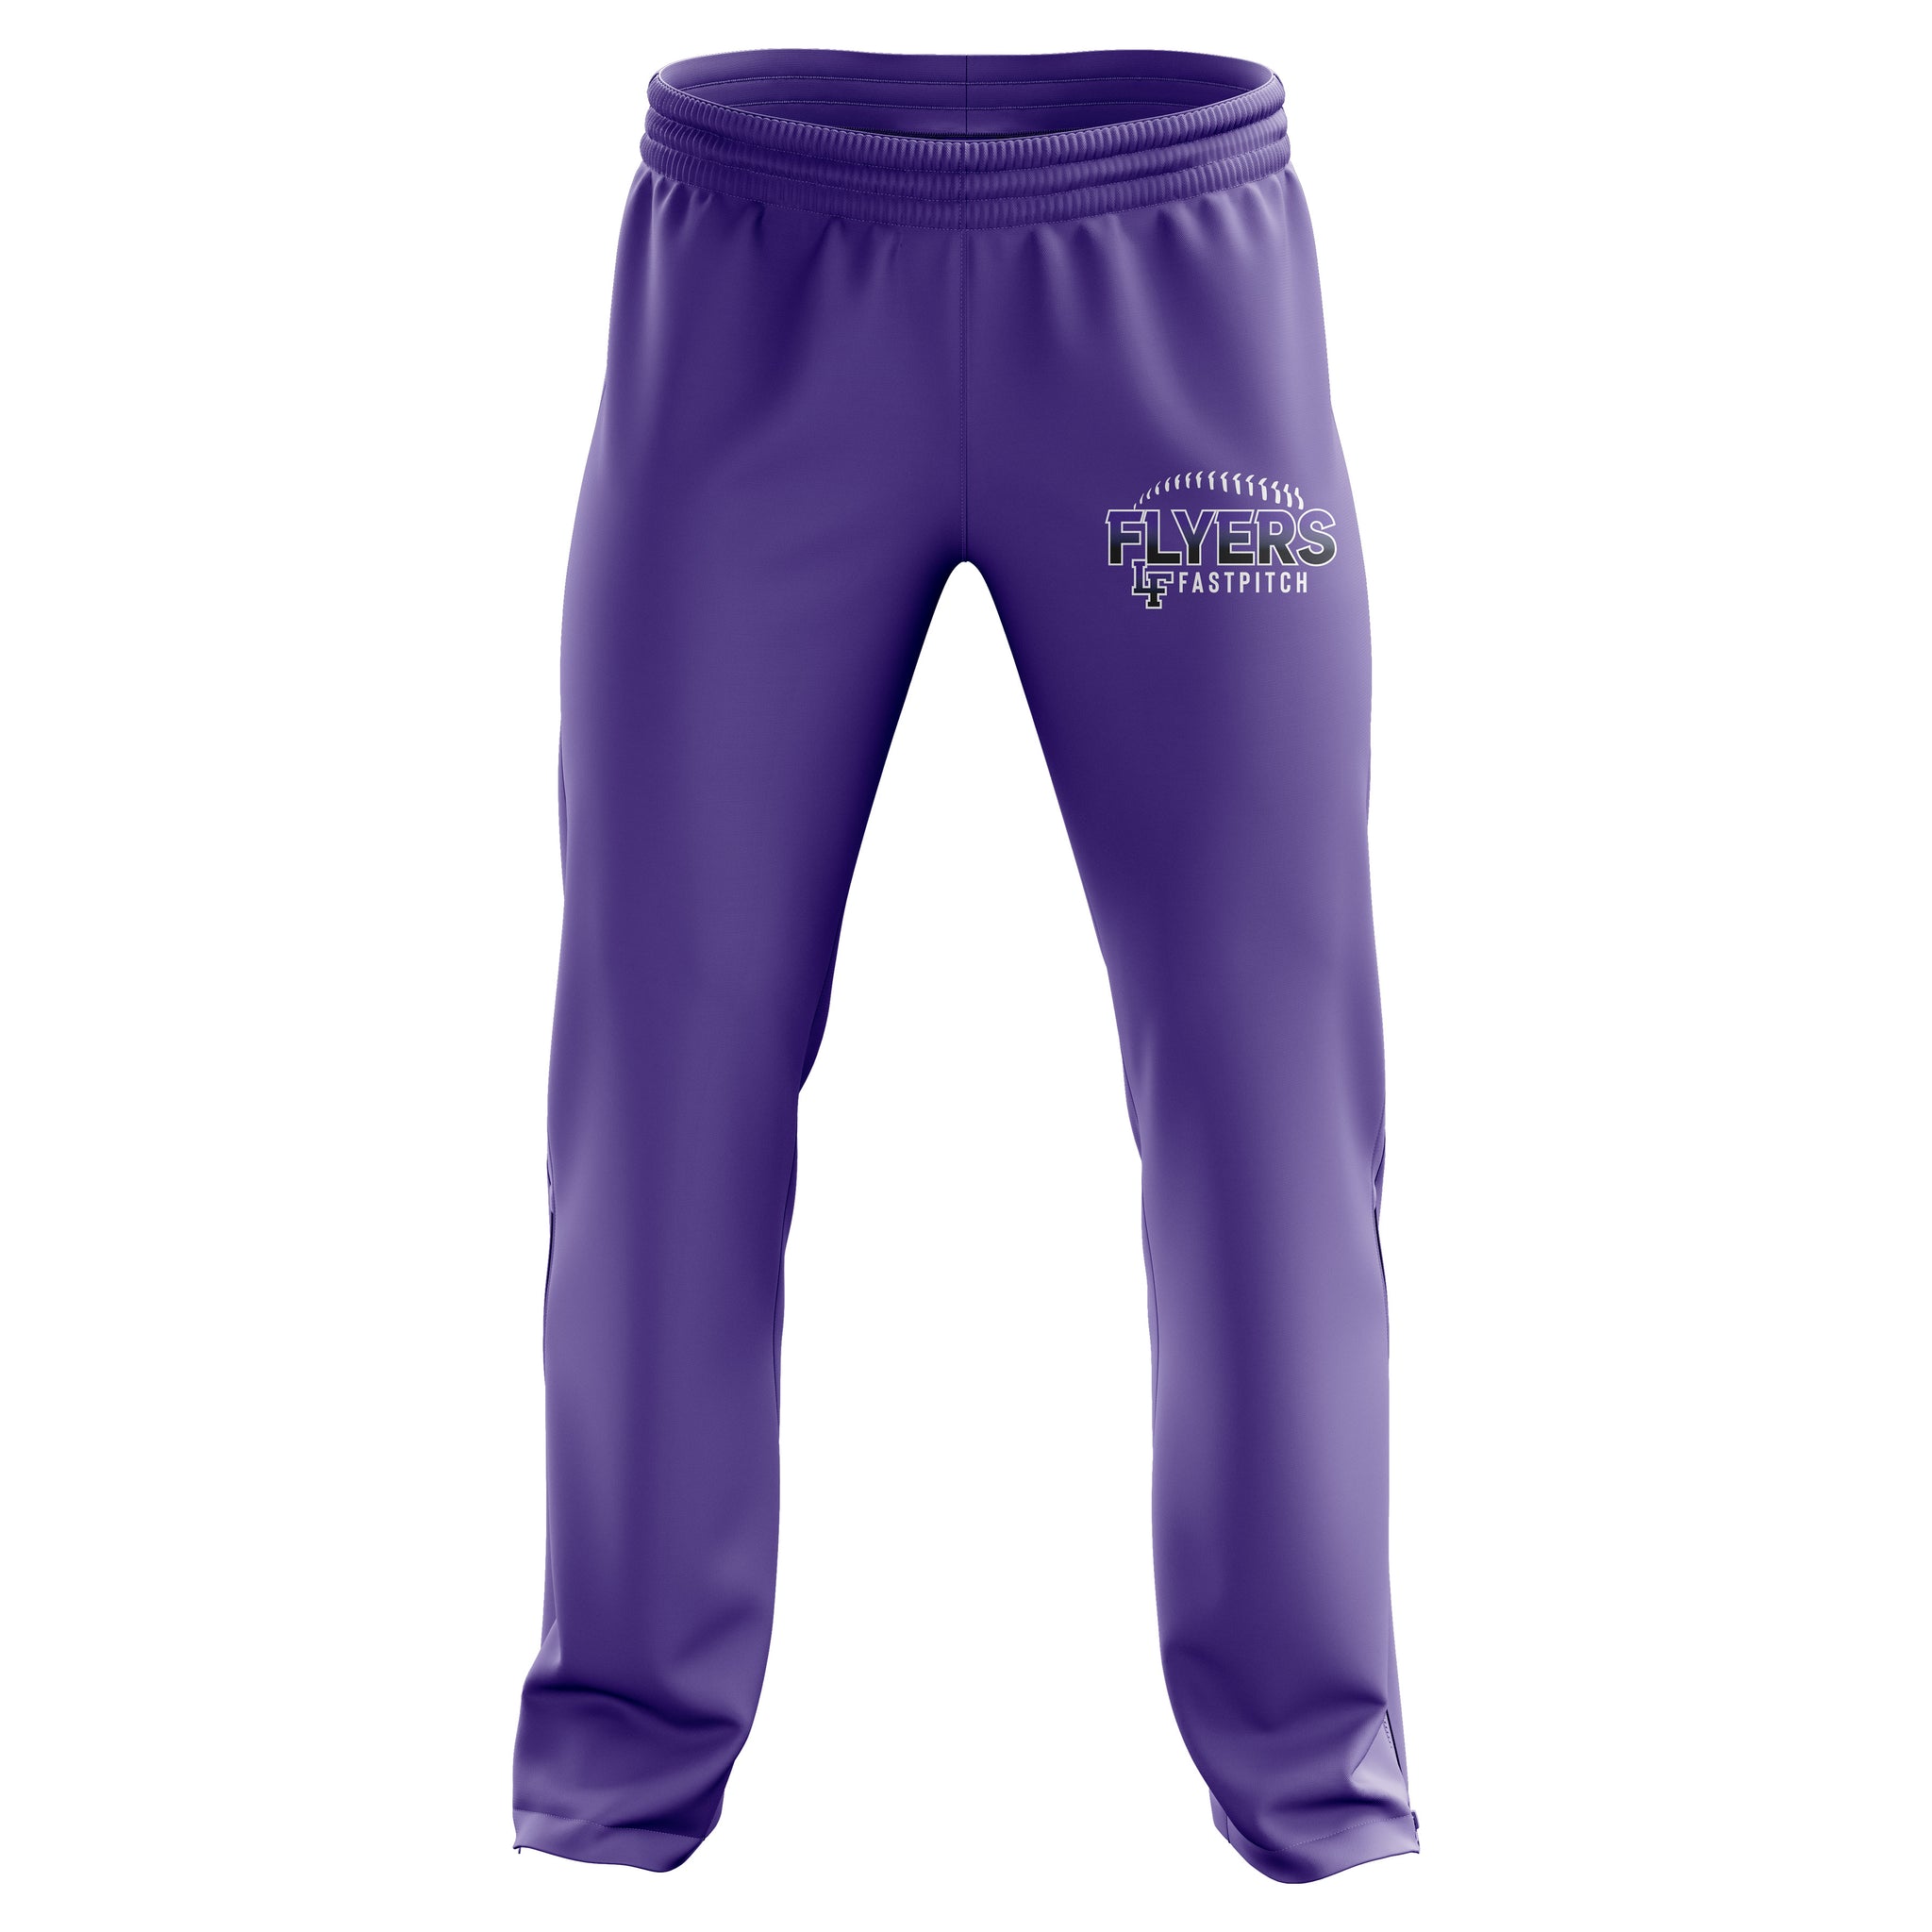 FLYERS FASTPITCH FULL SUB WARMUP PANTS